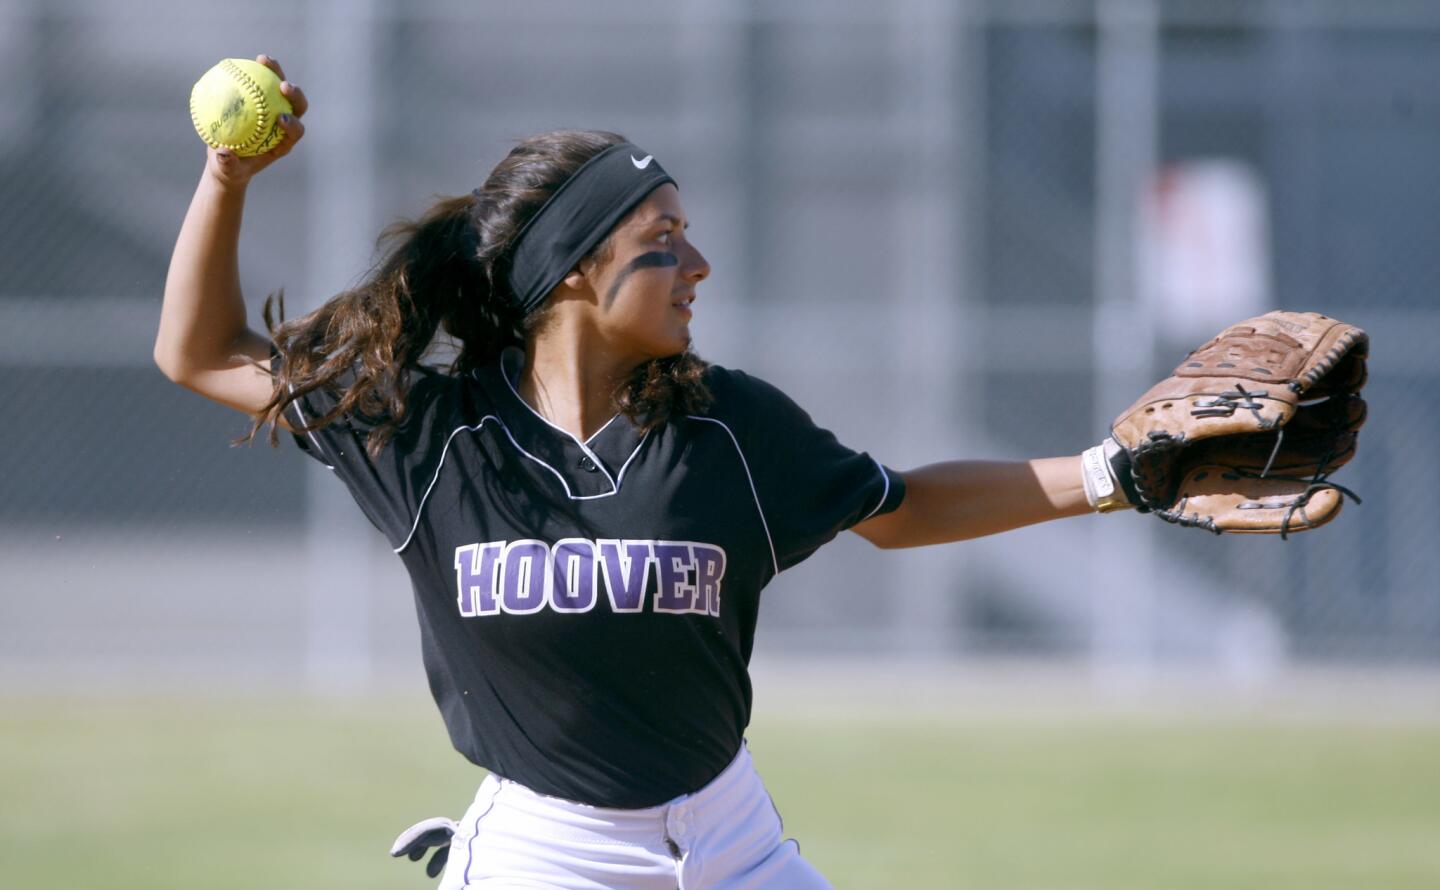 Hoover High School softball player #23 Samantha Serrano throws to first base in game vs. Burbank High School, at home in Glendale on Thursday, April 13, 2017.